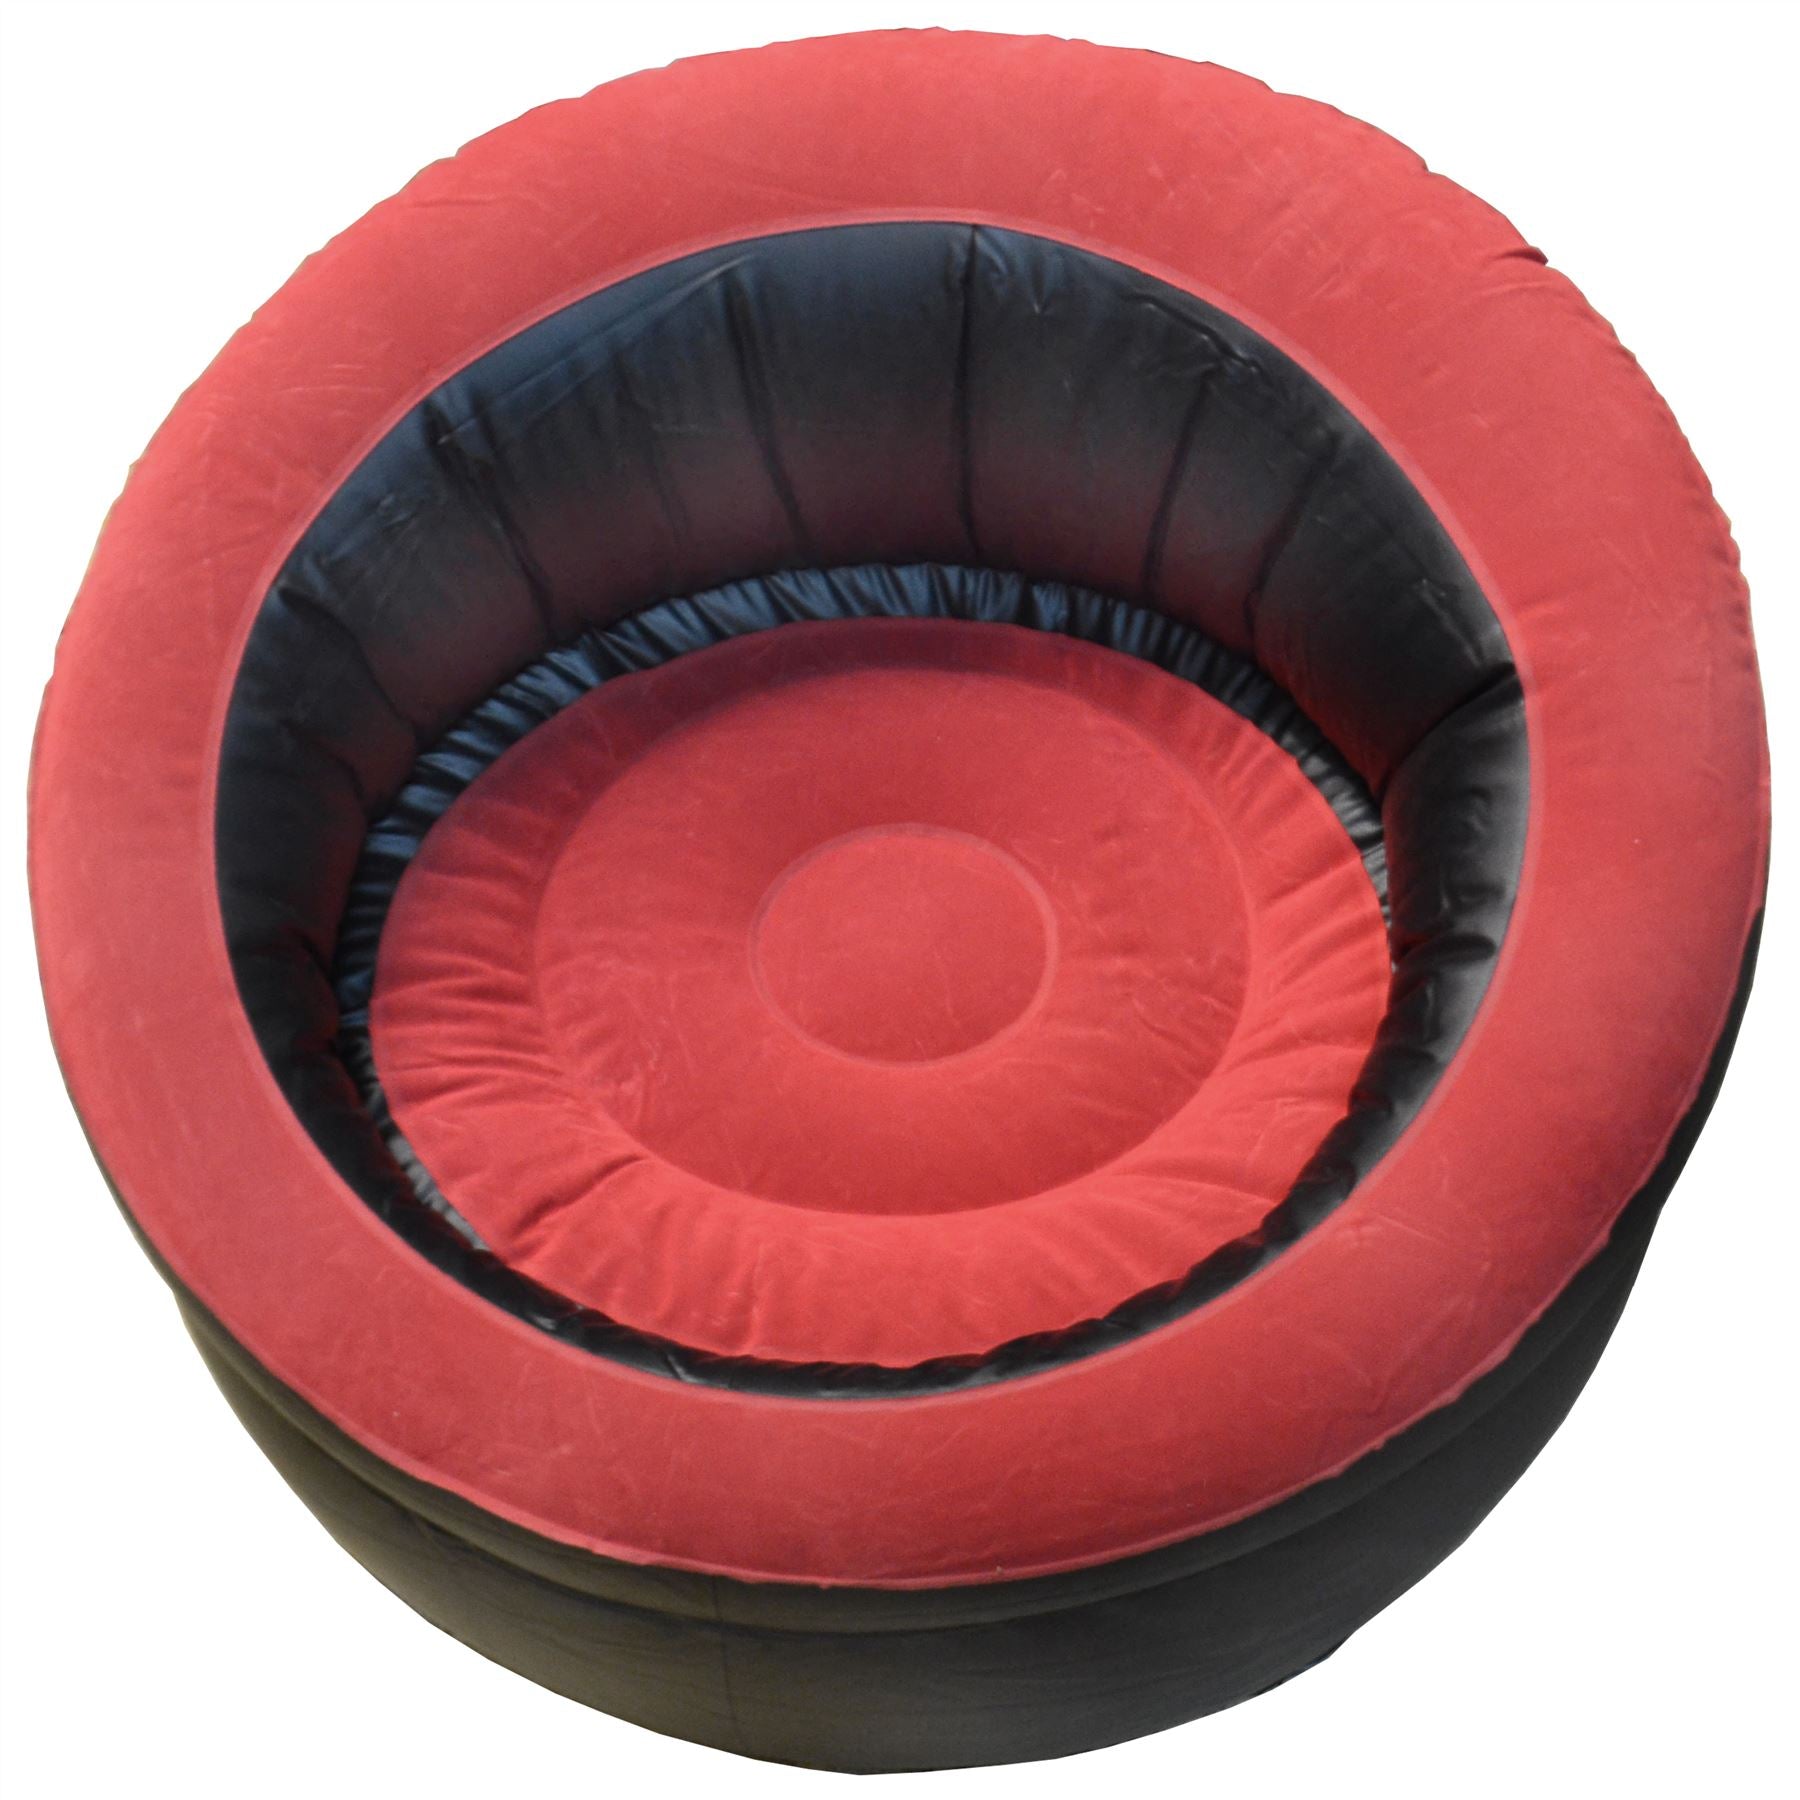 Single Inflatable Chair Blow Up Sofa Seat Lounger Gaming Pod Camping Lounge